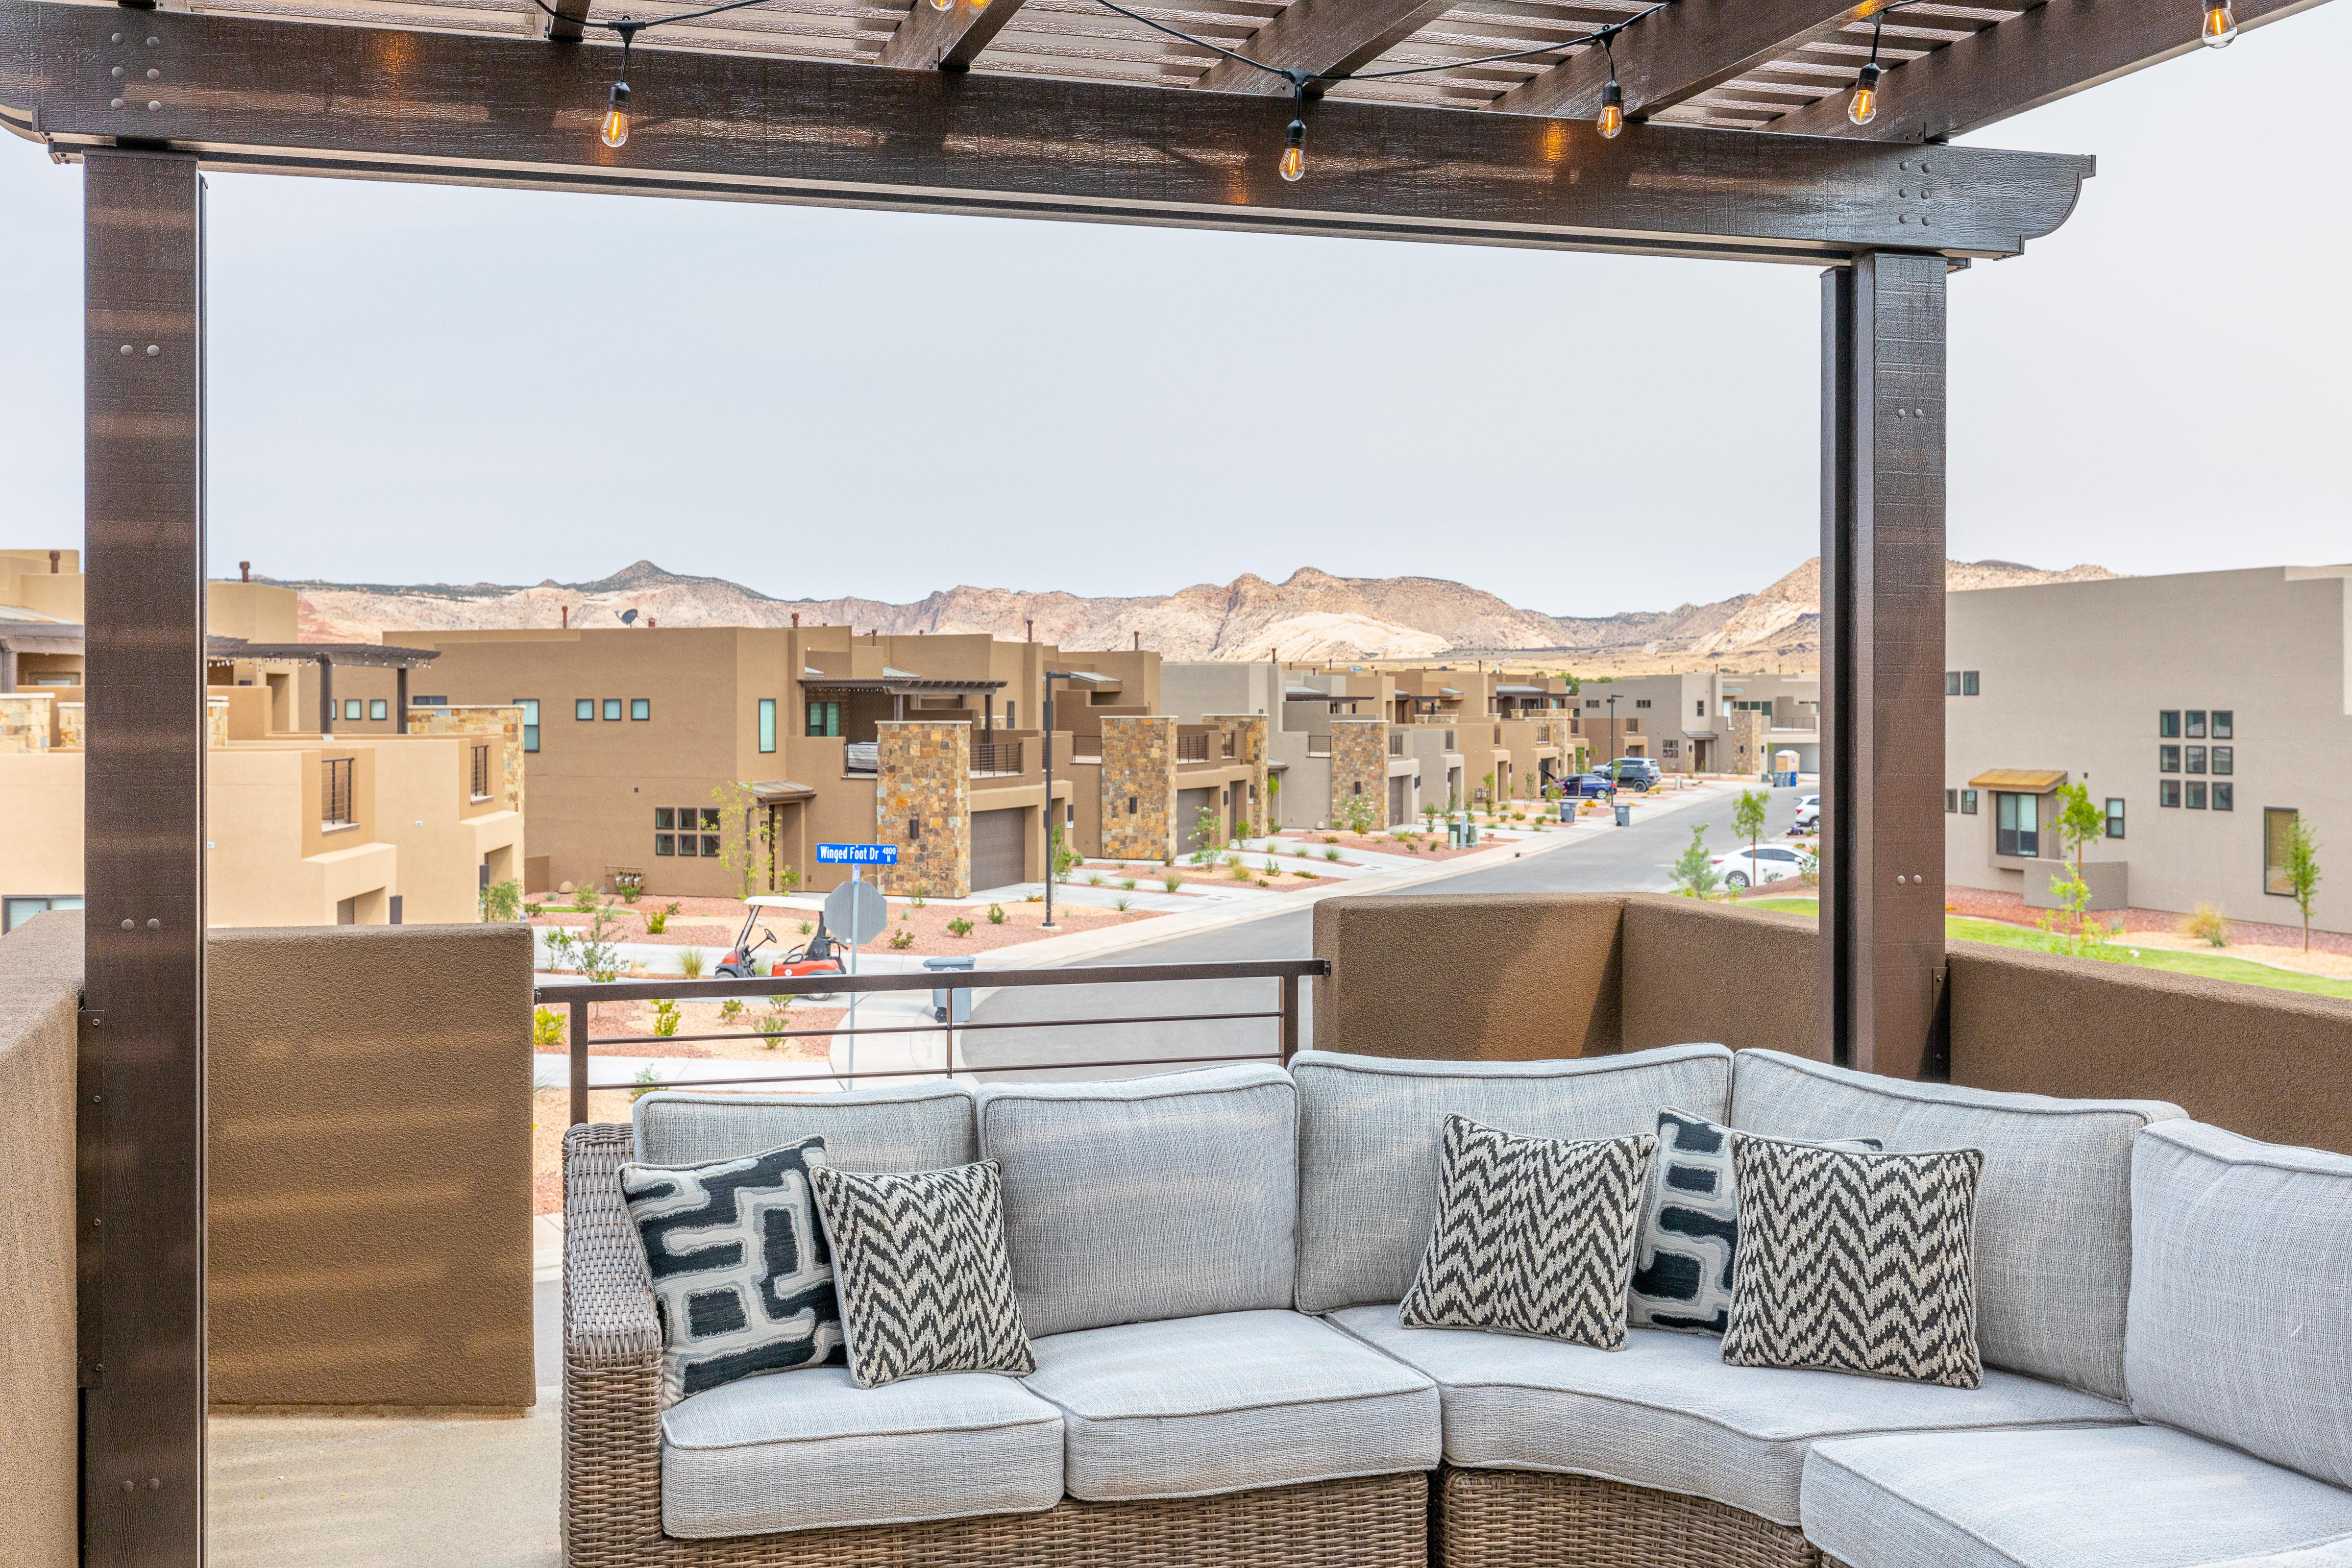 The Patio Deck is a spacious area to entertain guests while enjoying the beautiful surrounding landscapes of Snow Canyon State Park